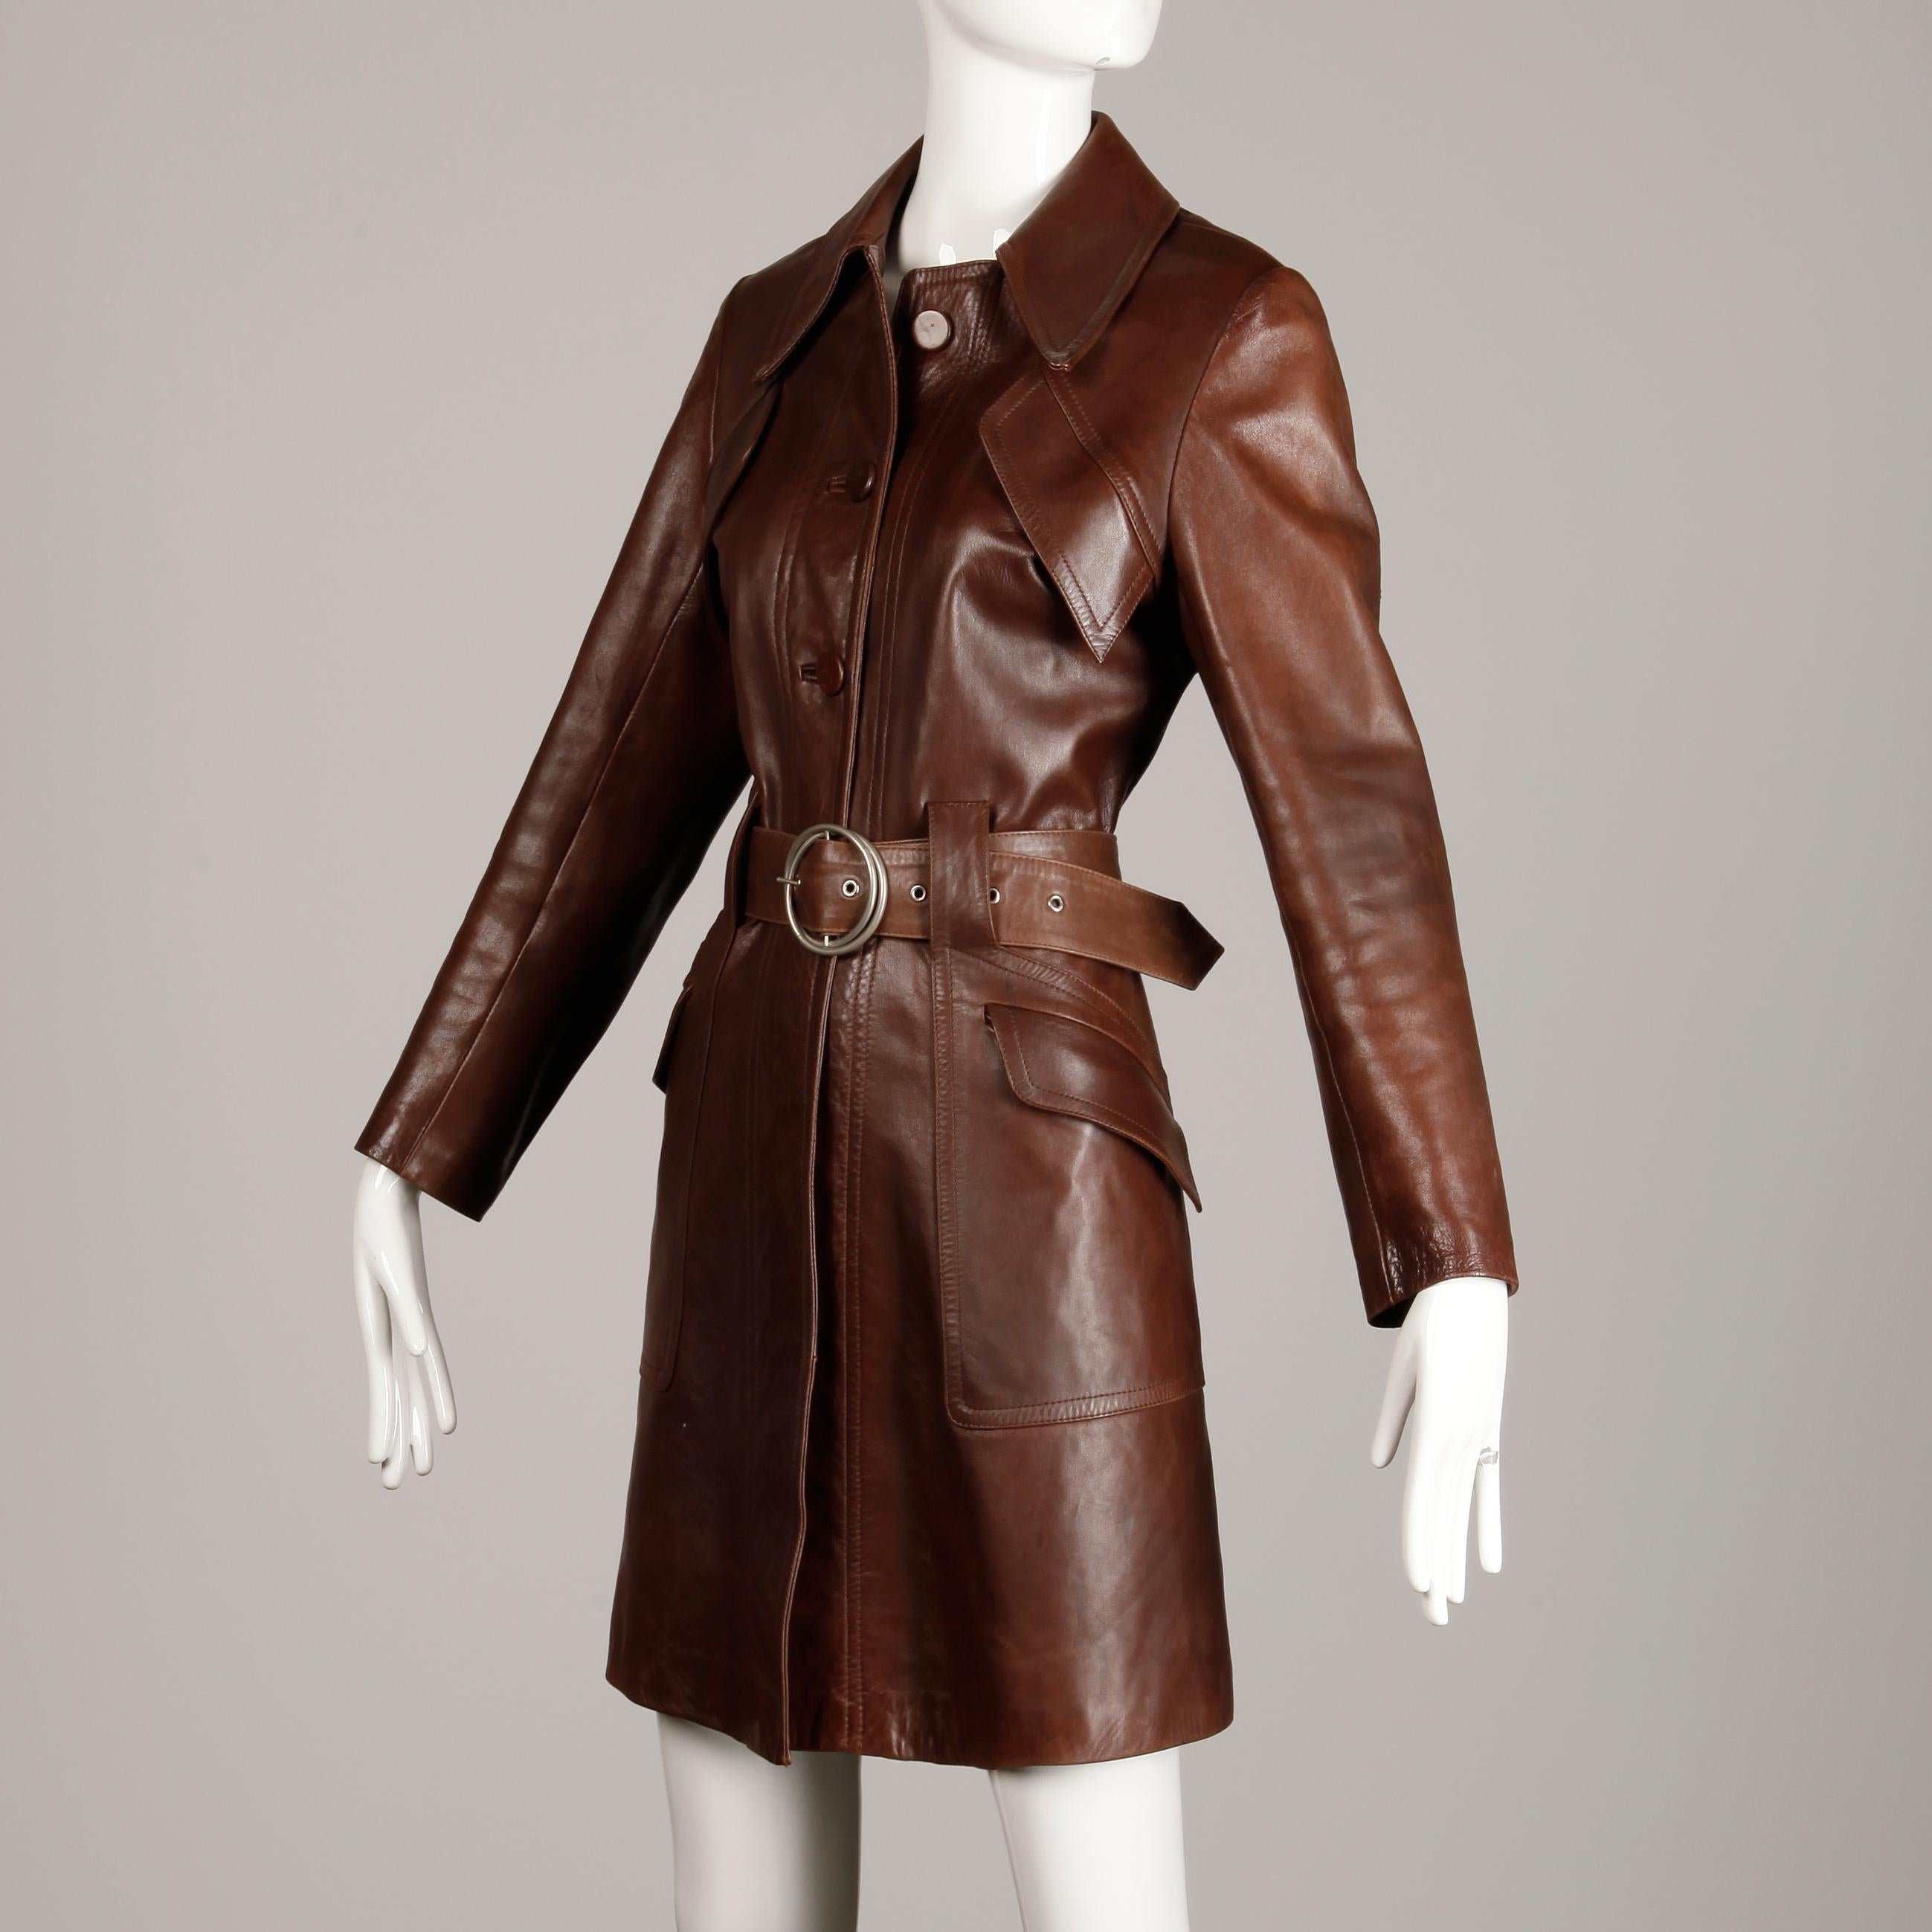 Women's 1970s Vintage Soft Buttery Brown Leather Trench Coat with Belt